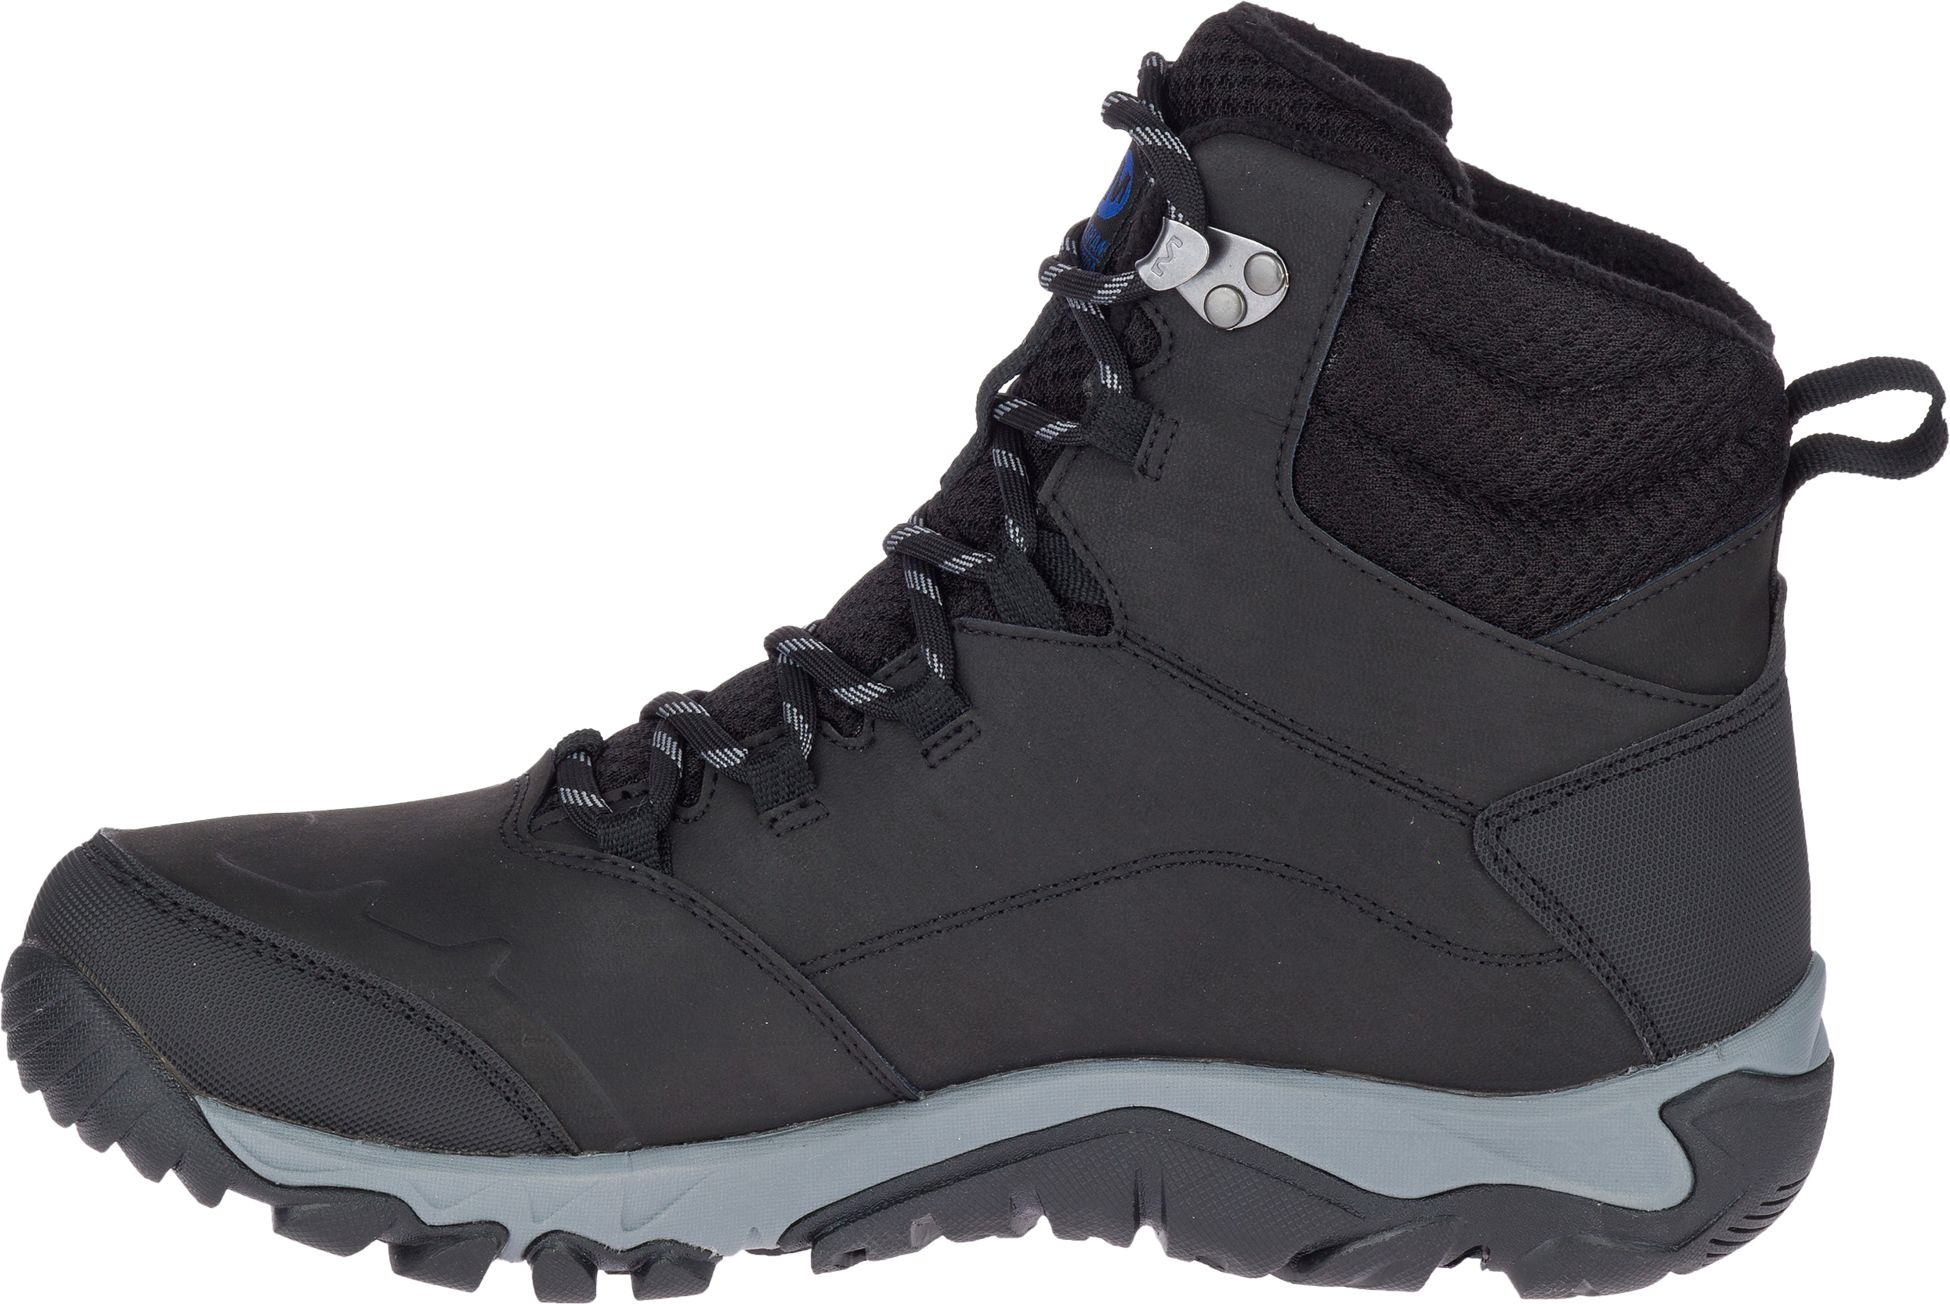 MERRELL, M THERMO FRACTAL MID WTPF